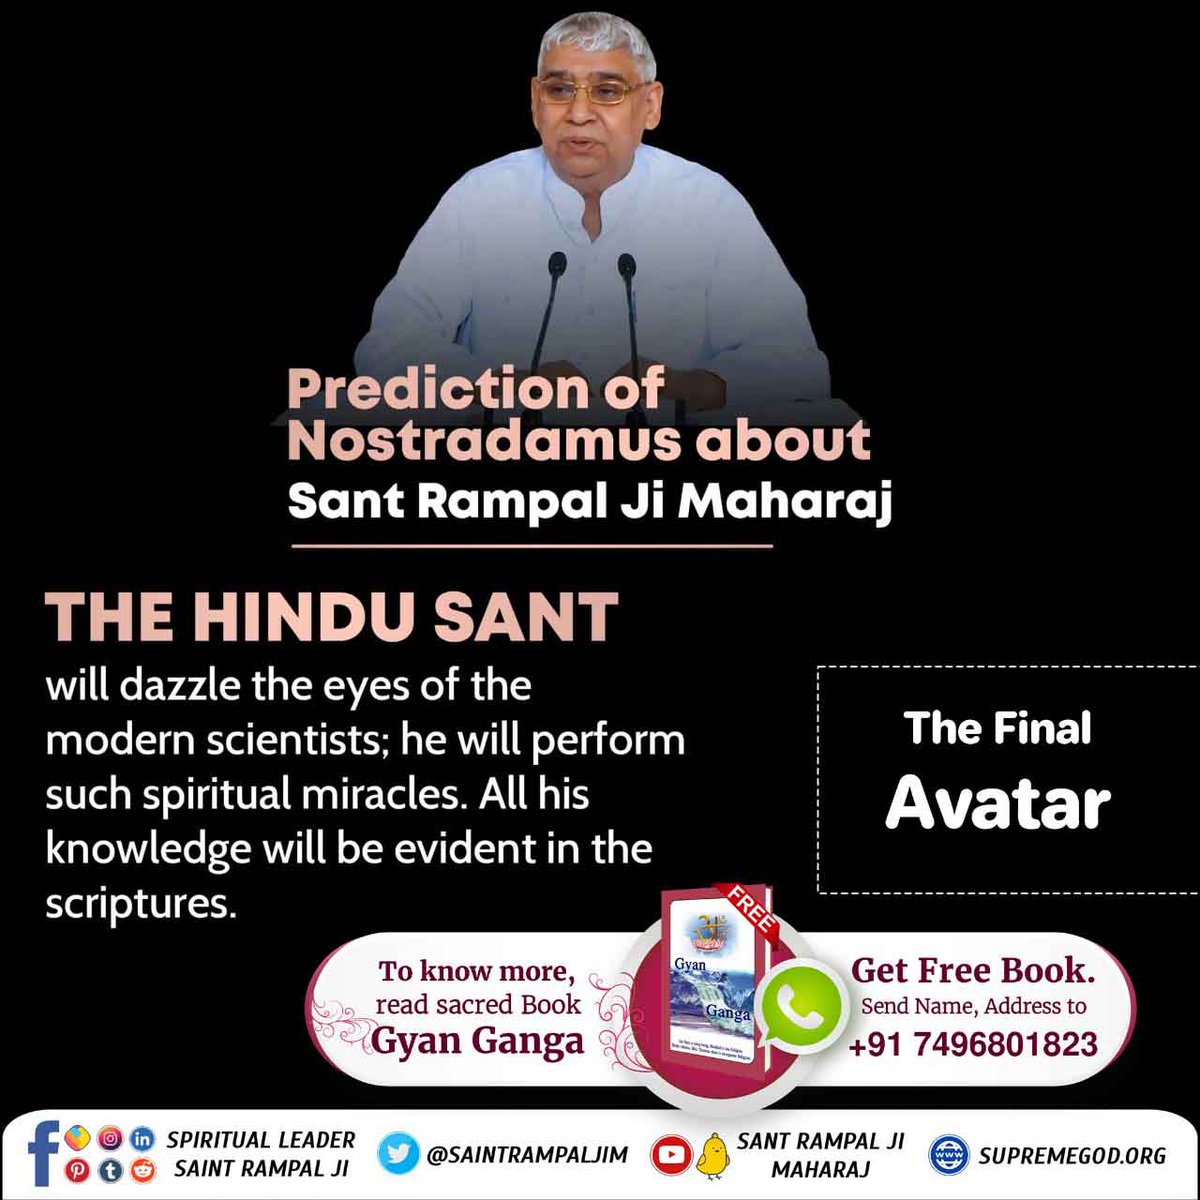 #आदि_सनातनधर्म_होगाप्रतिष्ठित
Prediction of Nostradamus about Sant Rampal Ji Maharaj

THE HINDU SANT
will dazzle the eyes of the modern scientists; he will perform such spiritual miracles. All his knowledge will be evident in the scriptures.